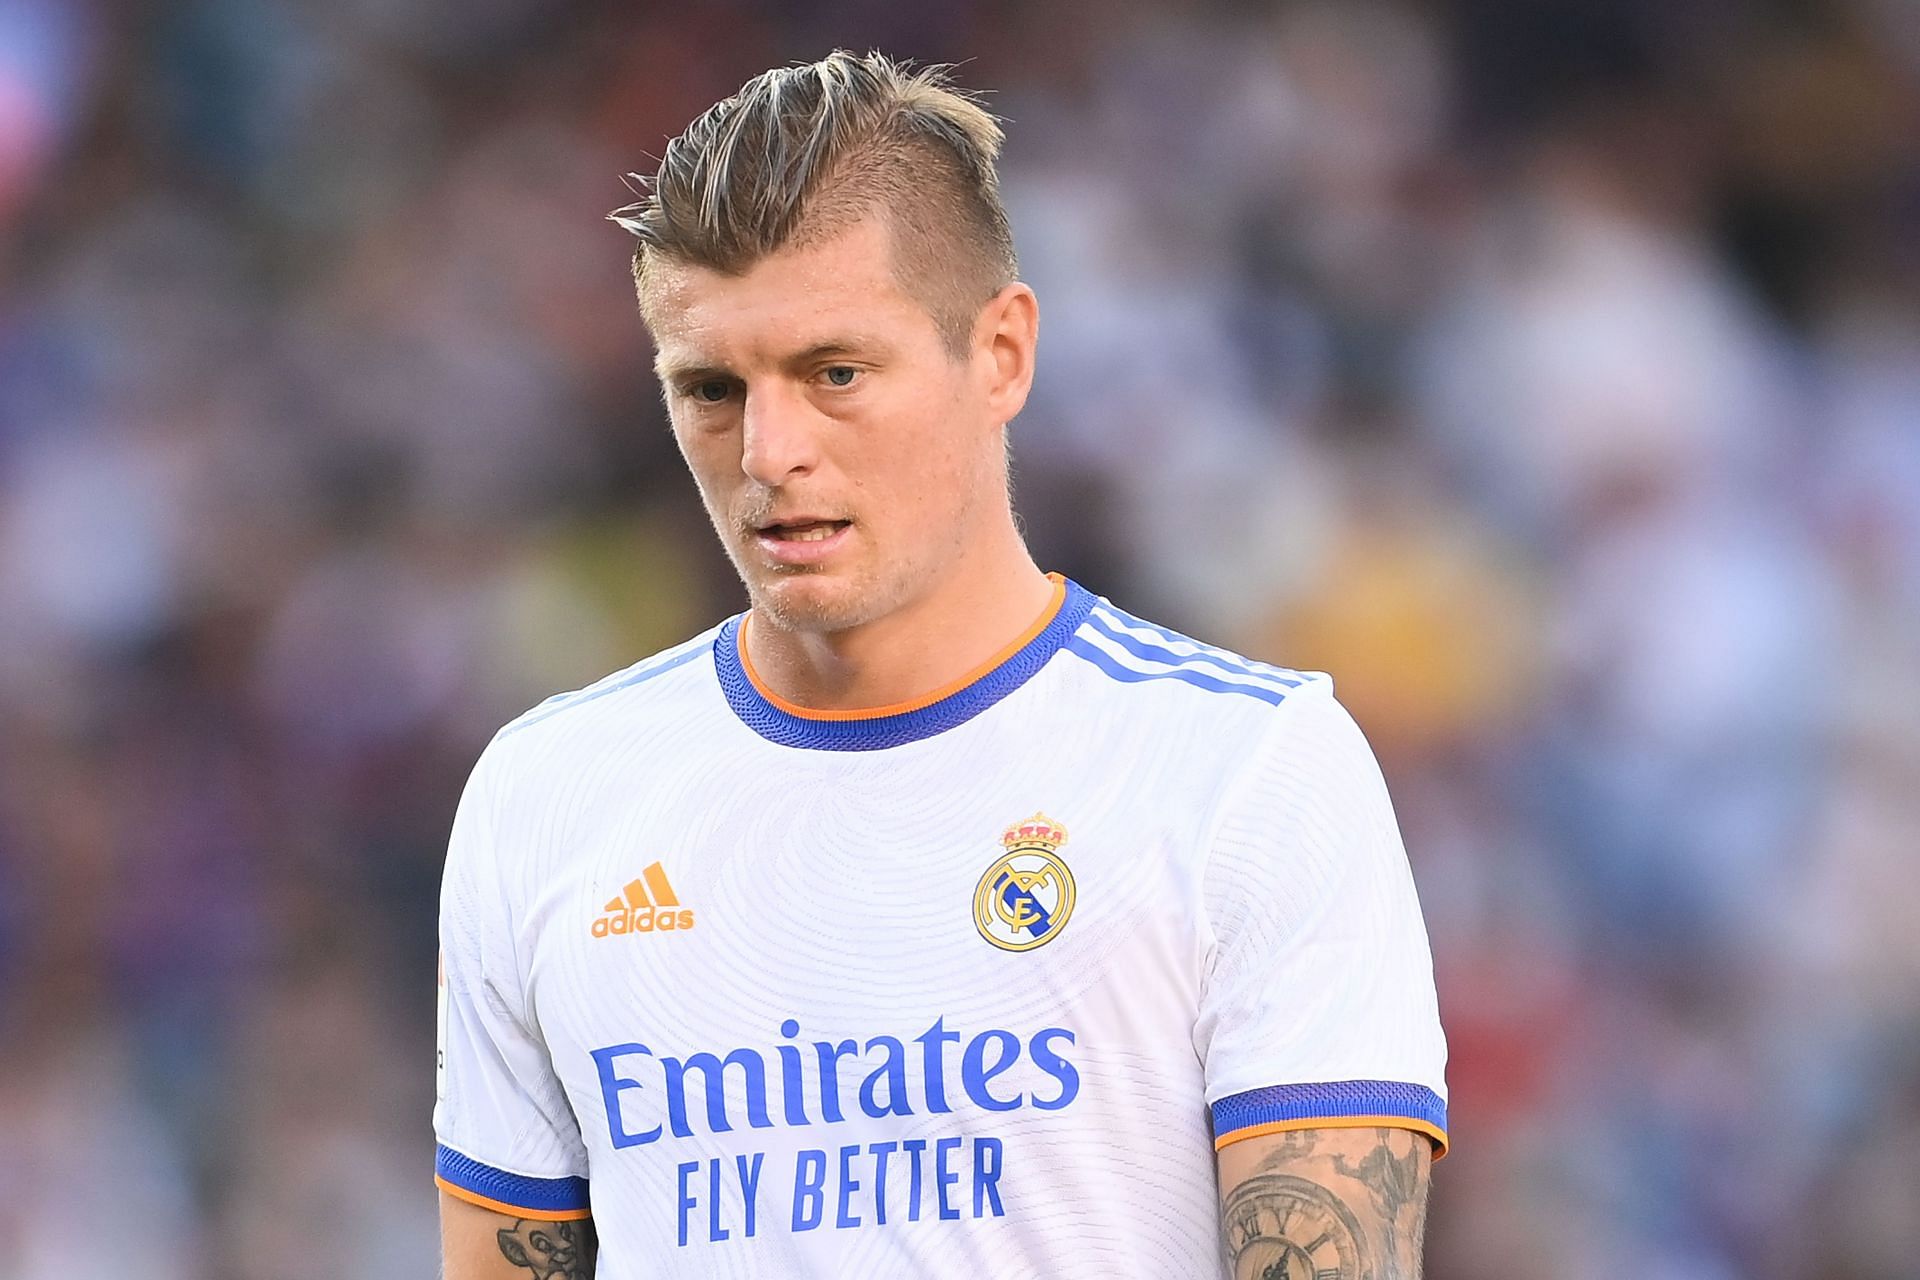 PSG are interested in Toni Kroos.